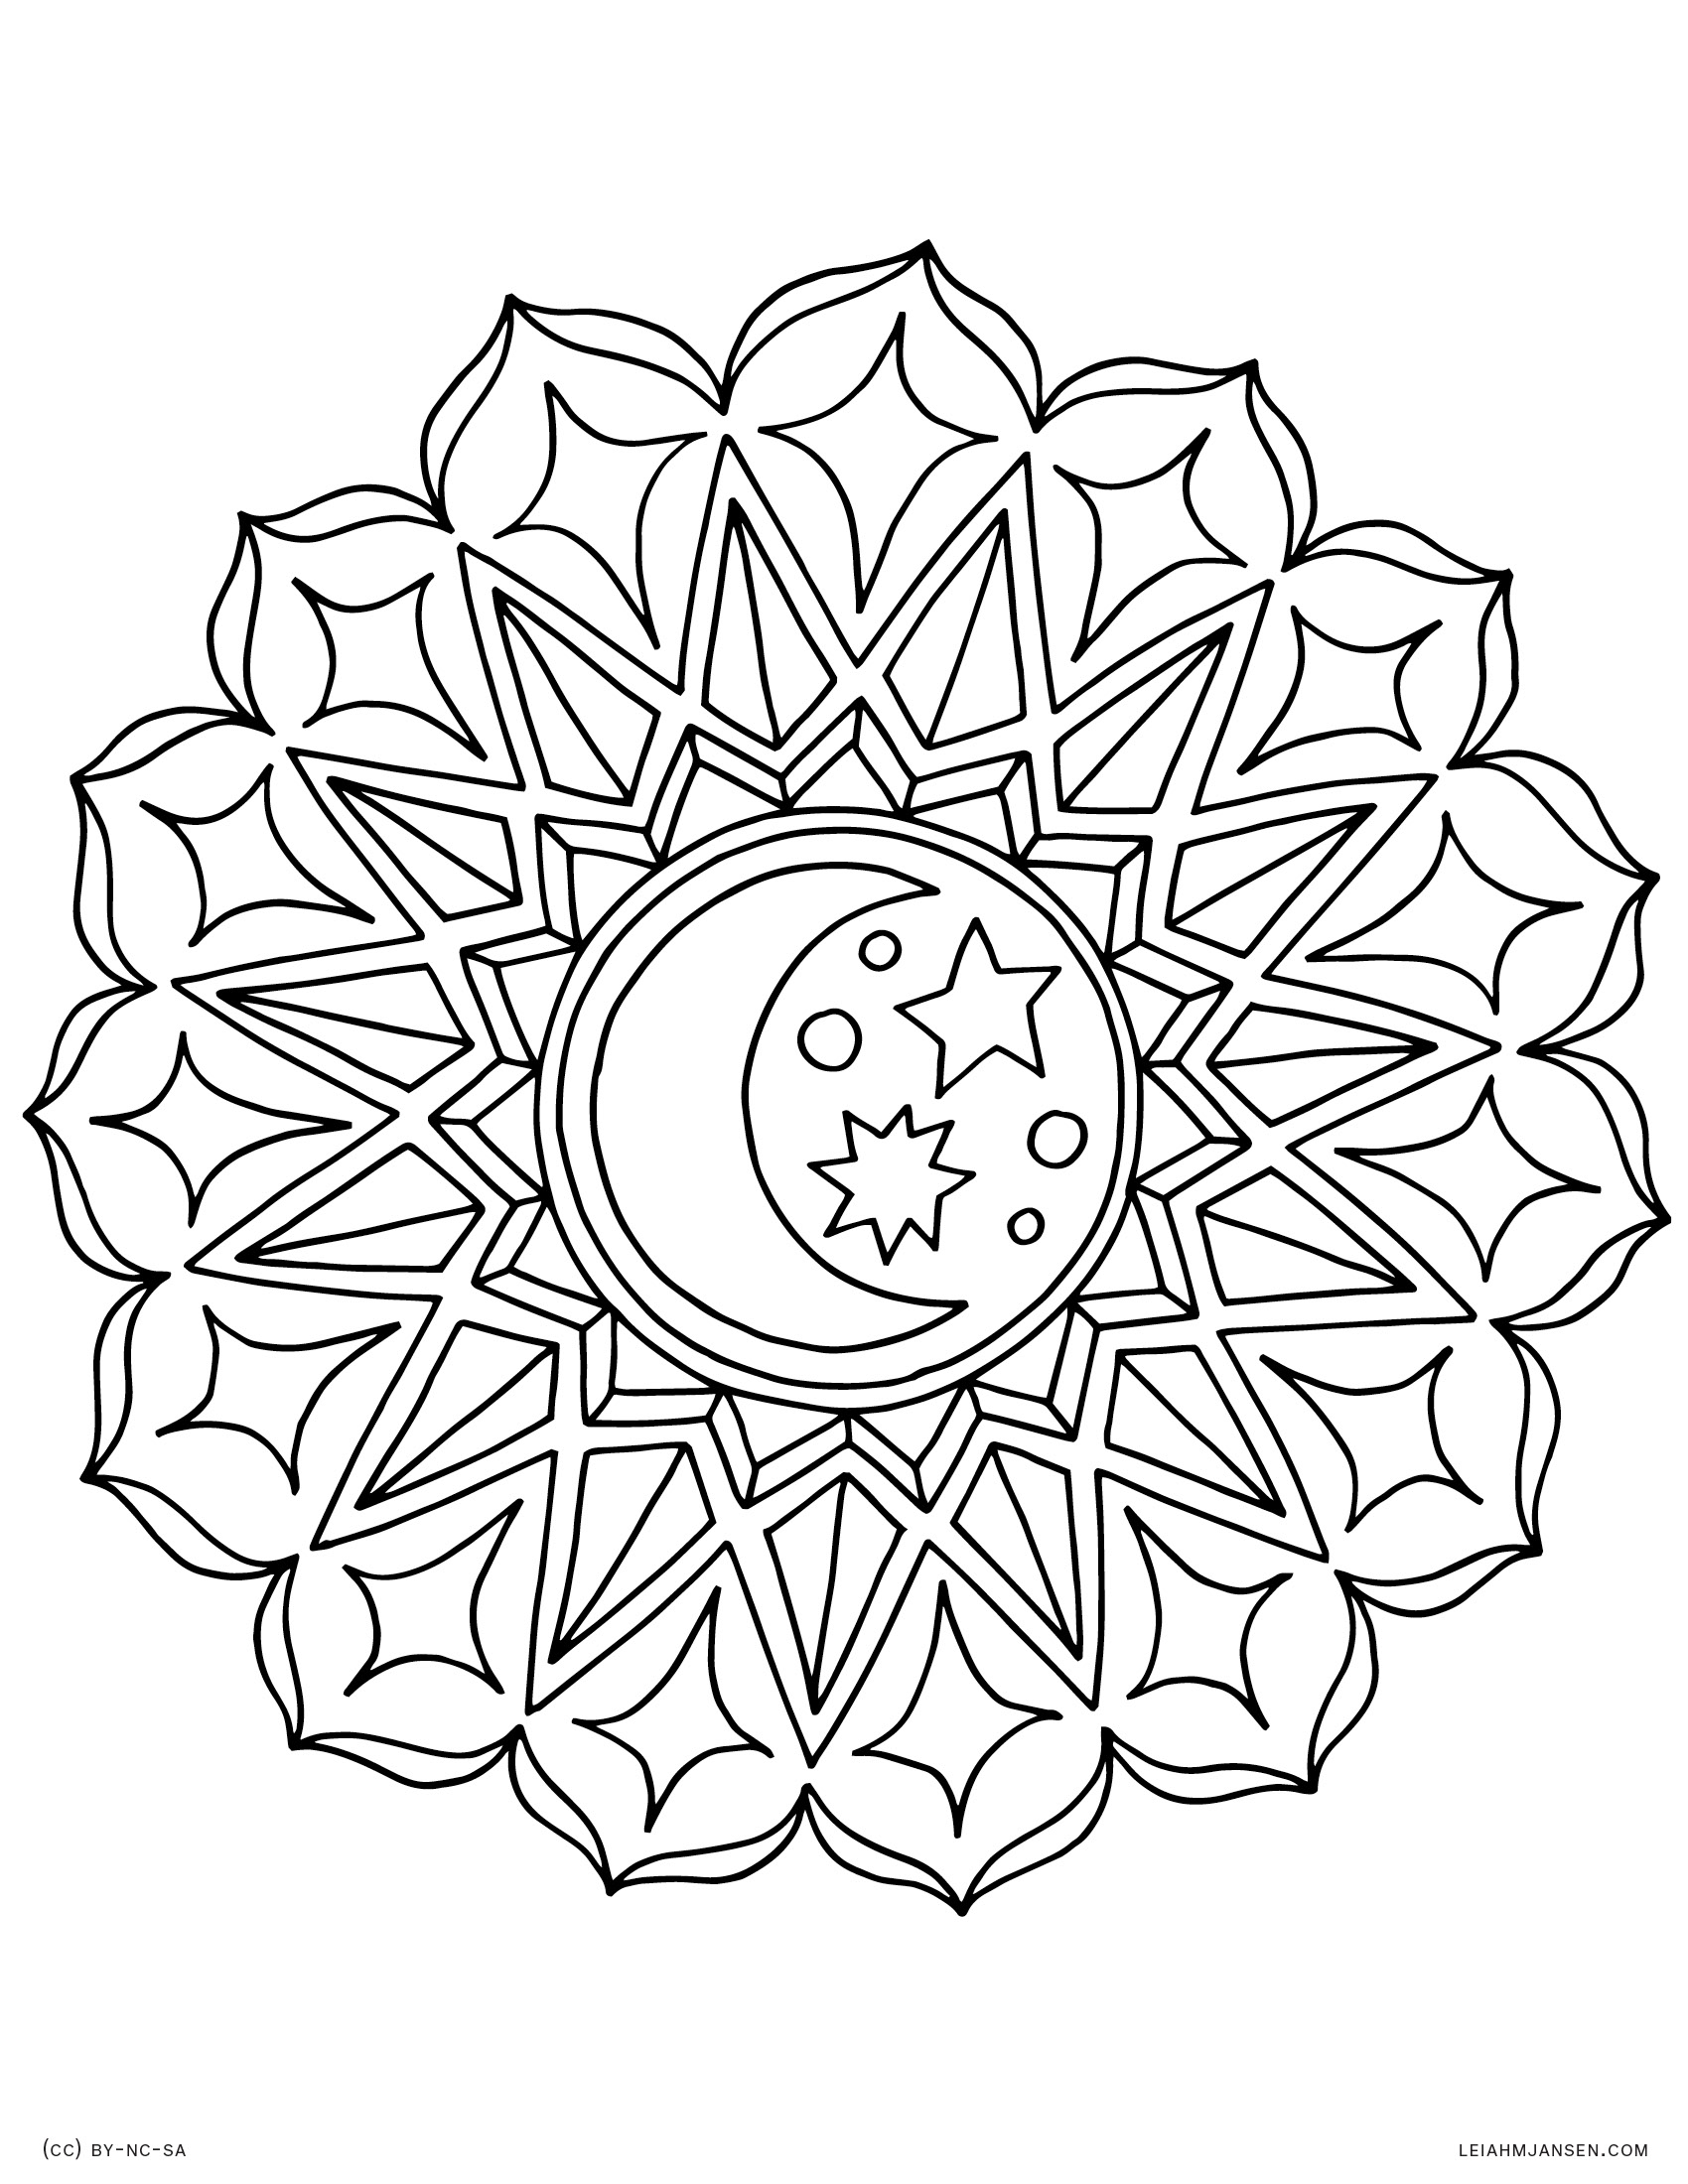 Coloring Pages : Coloring Staggering Free Printable Mandala Heart ...